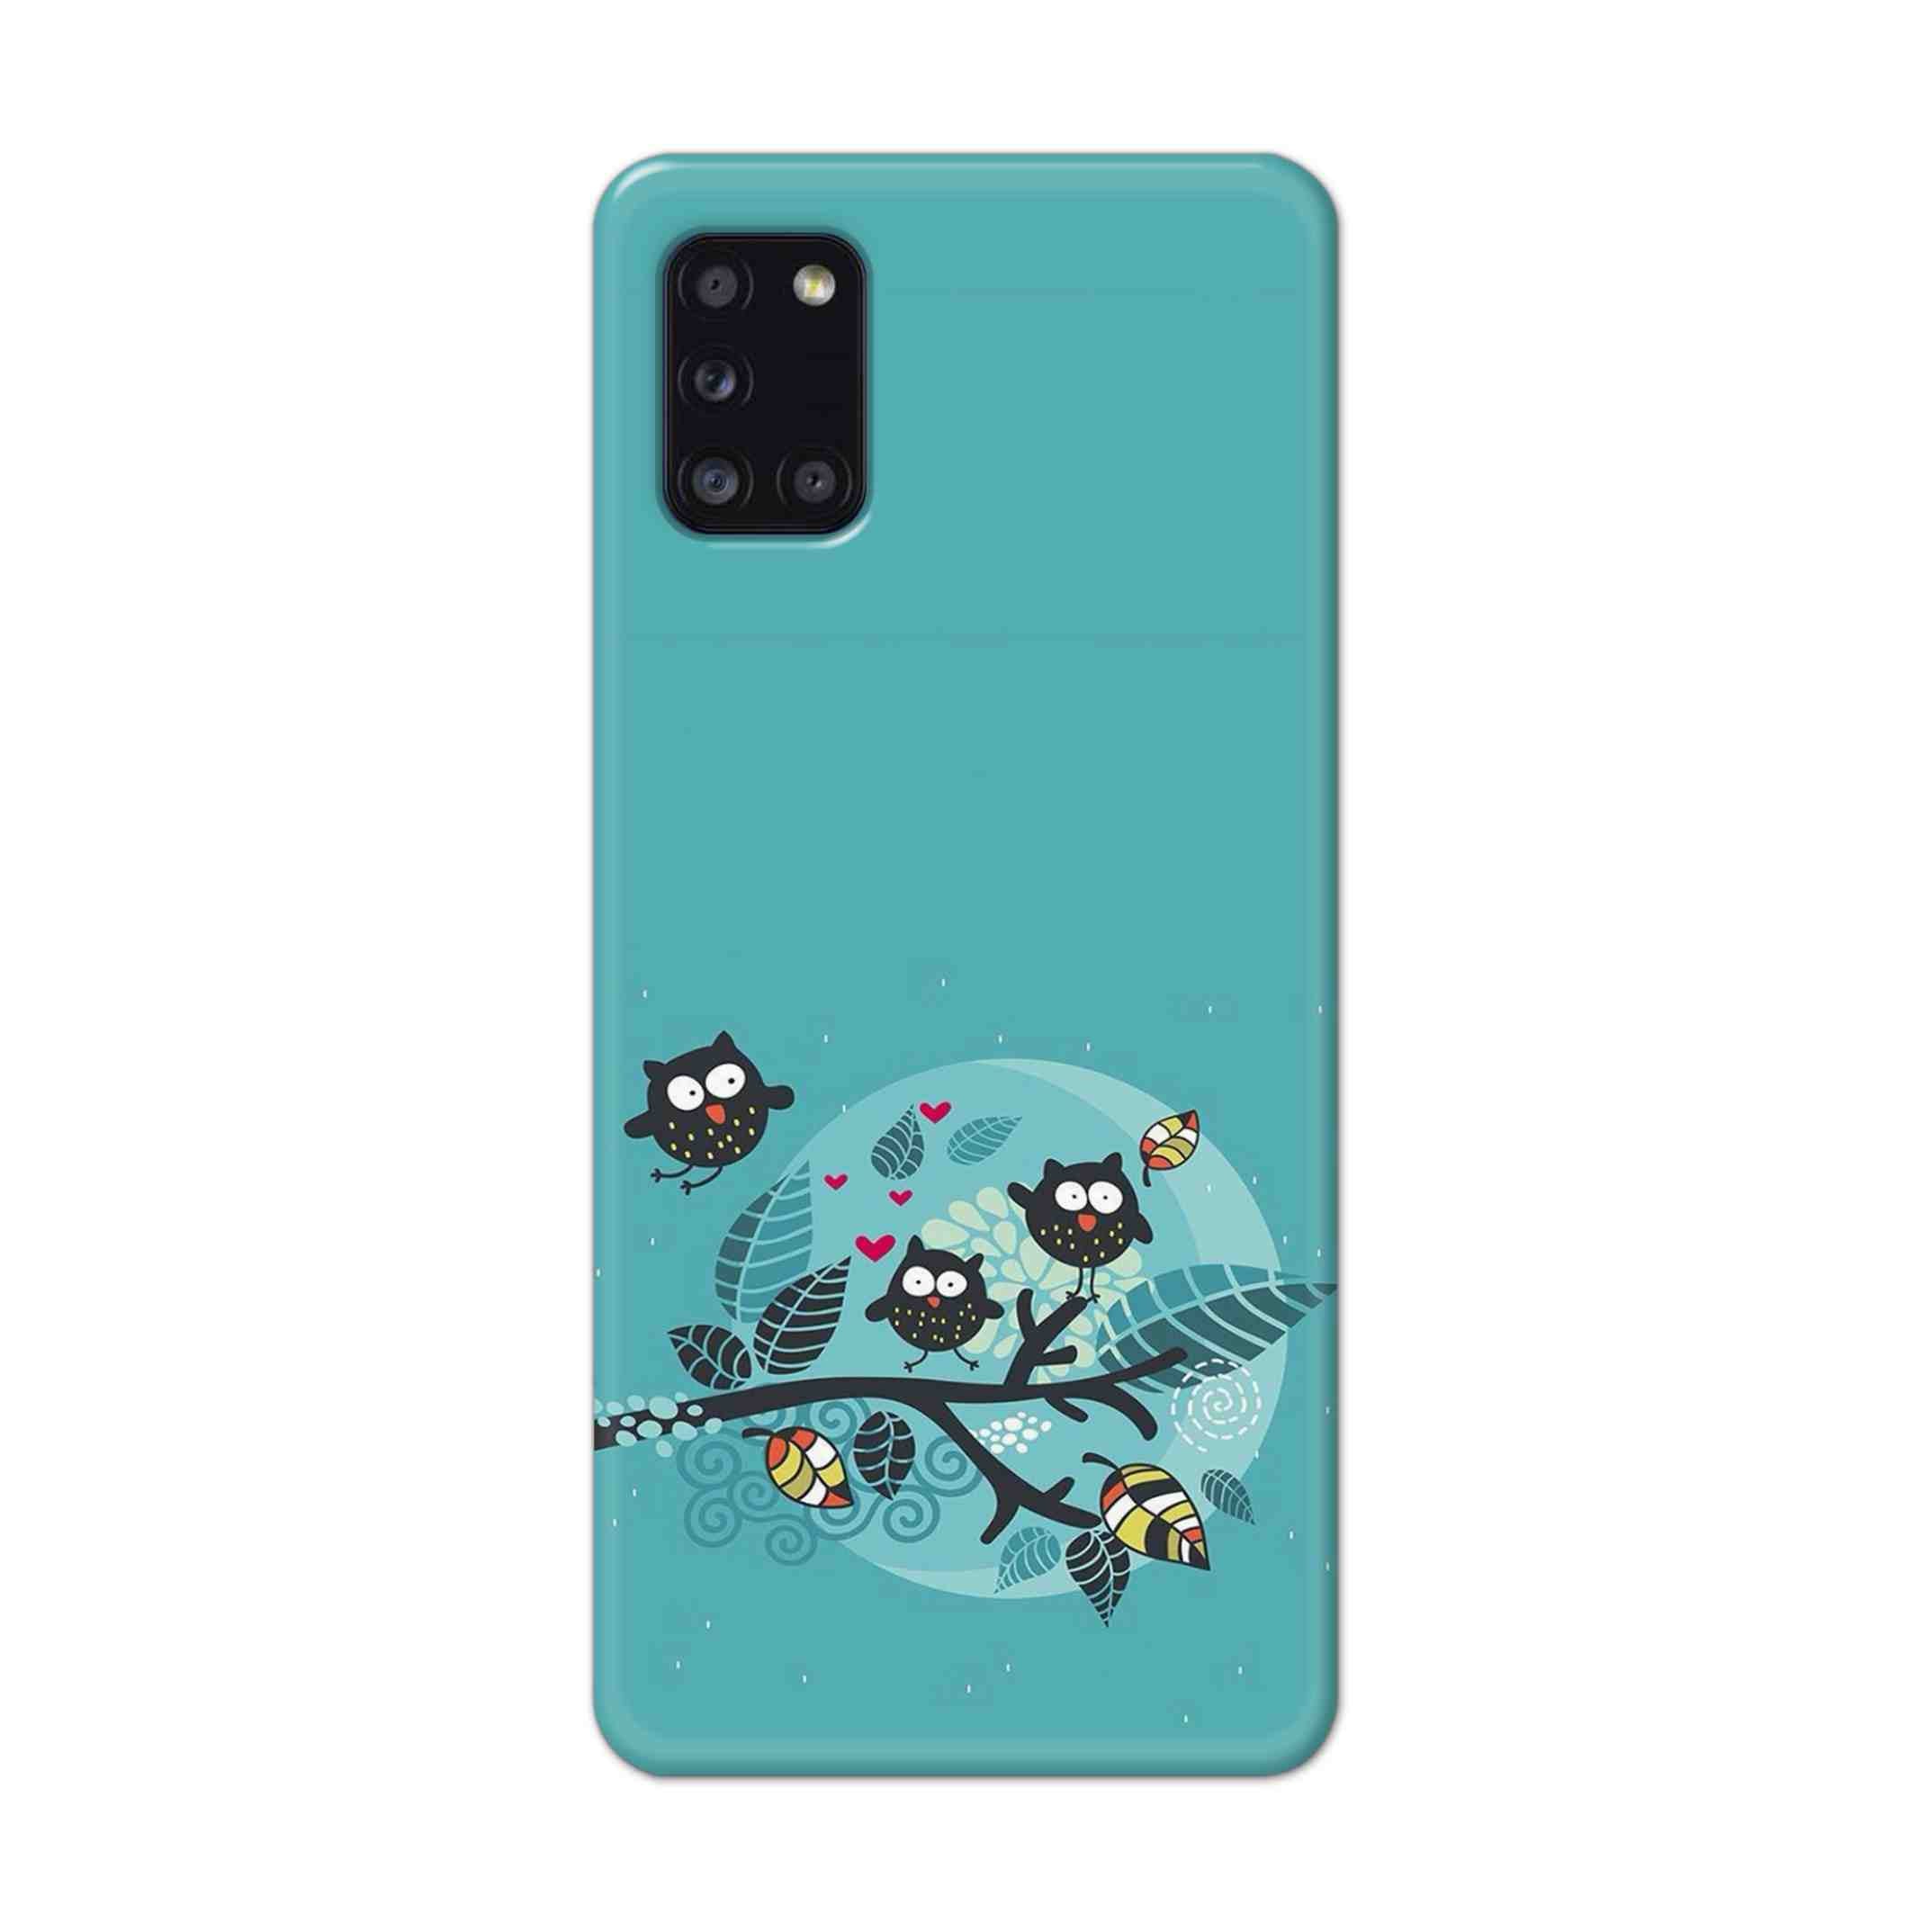 Buy Owl Hard Back Mobile Phone Case Cover For Samsung Galaxy A31 Online